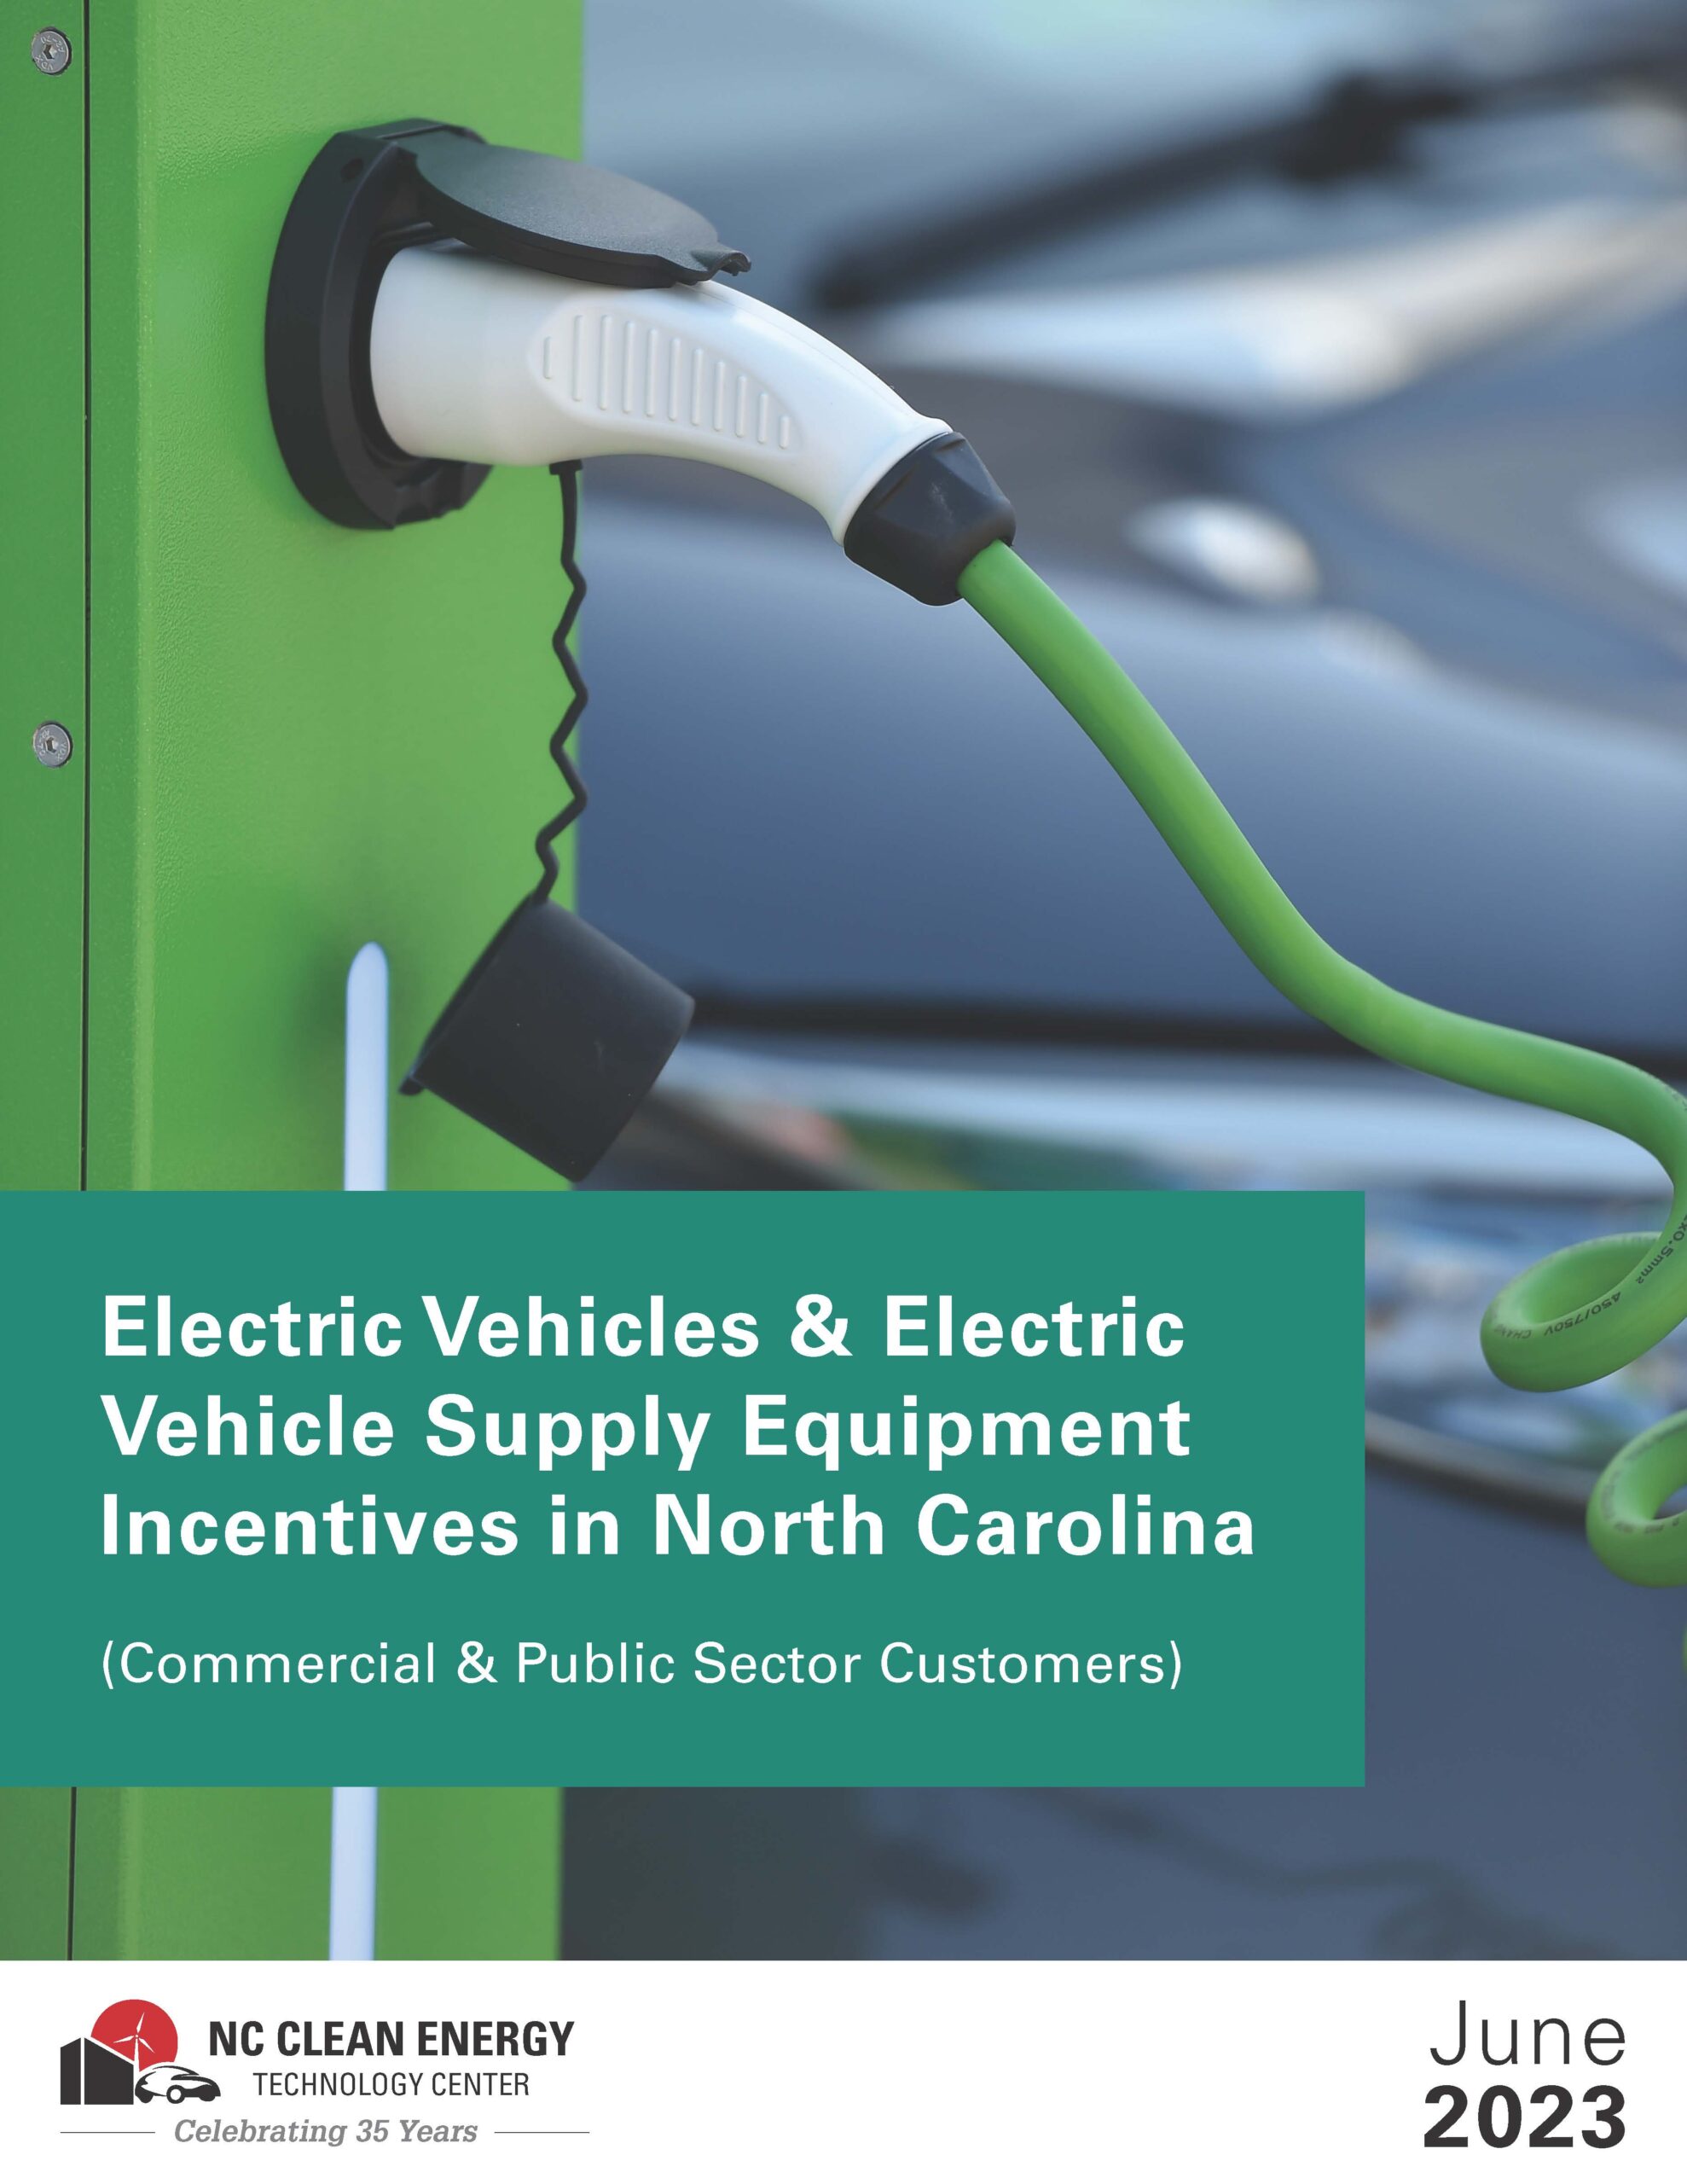 Everything You Need to Know About Electric Vehicles & Electric Vehicle